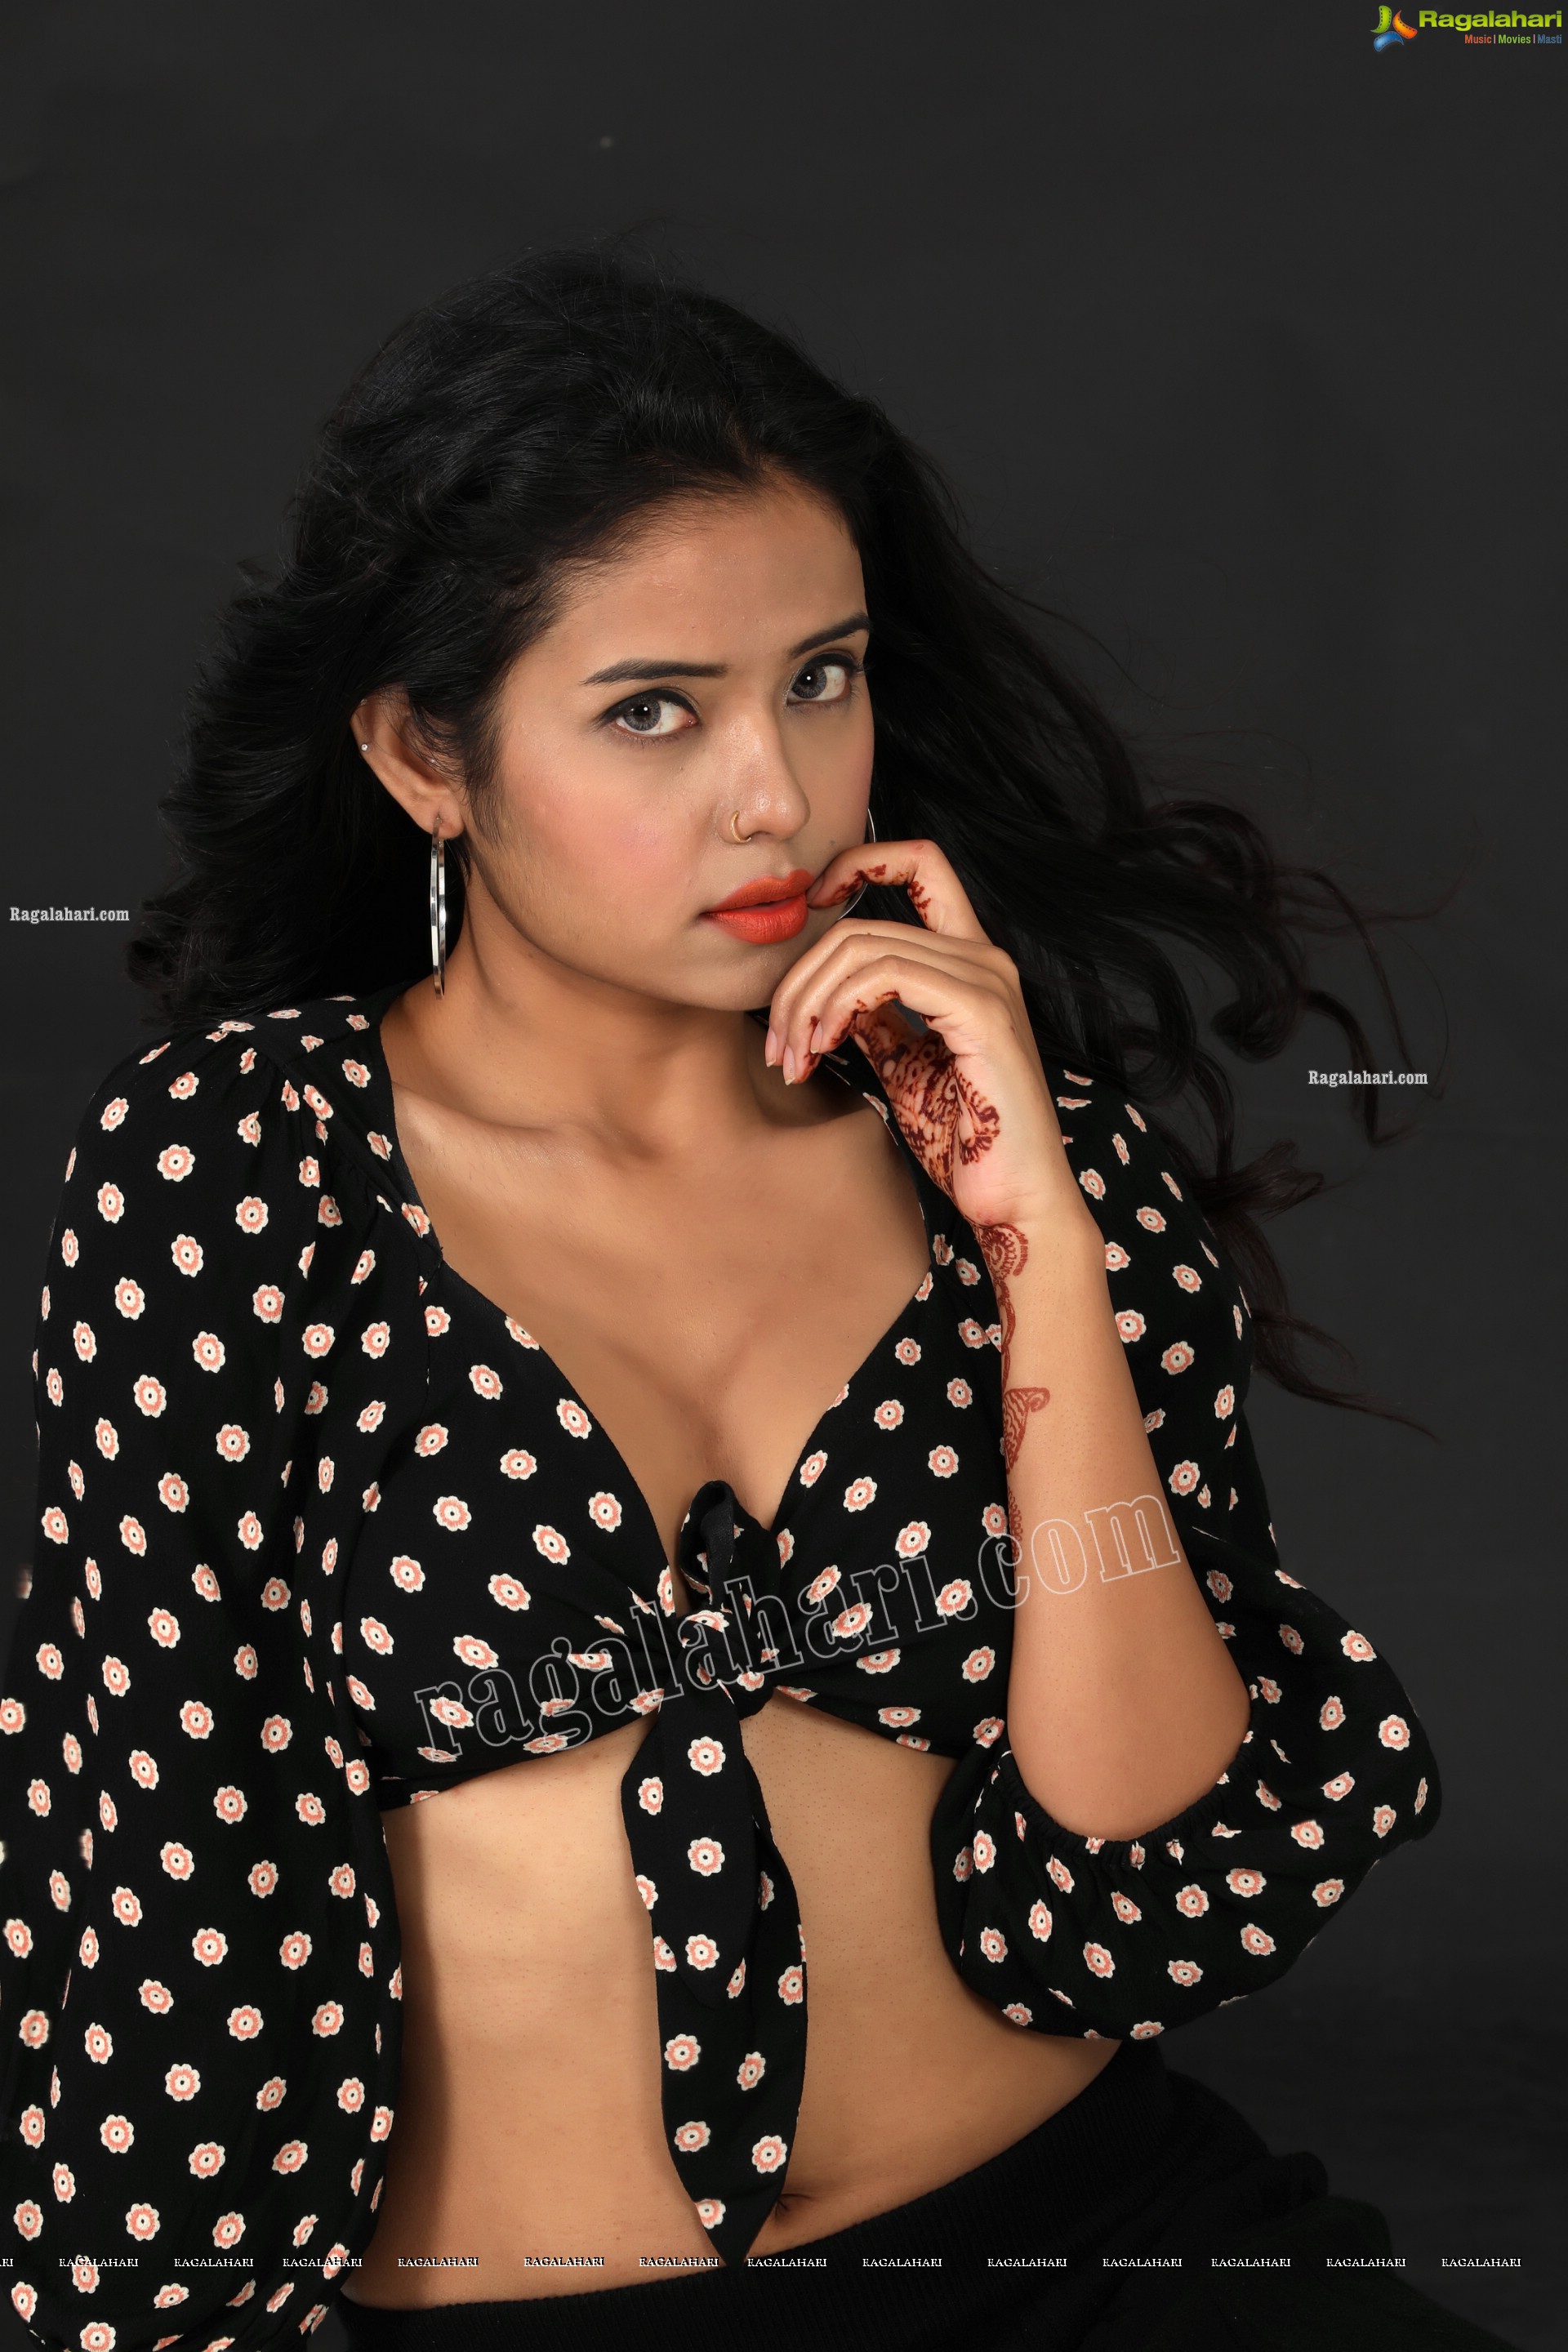 Swati Mandal in Black Front Tie Crop Top and Mini Skirt Exclusive Photo Shoot